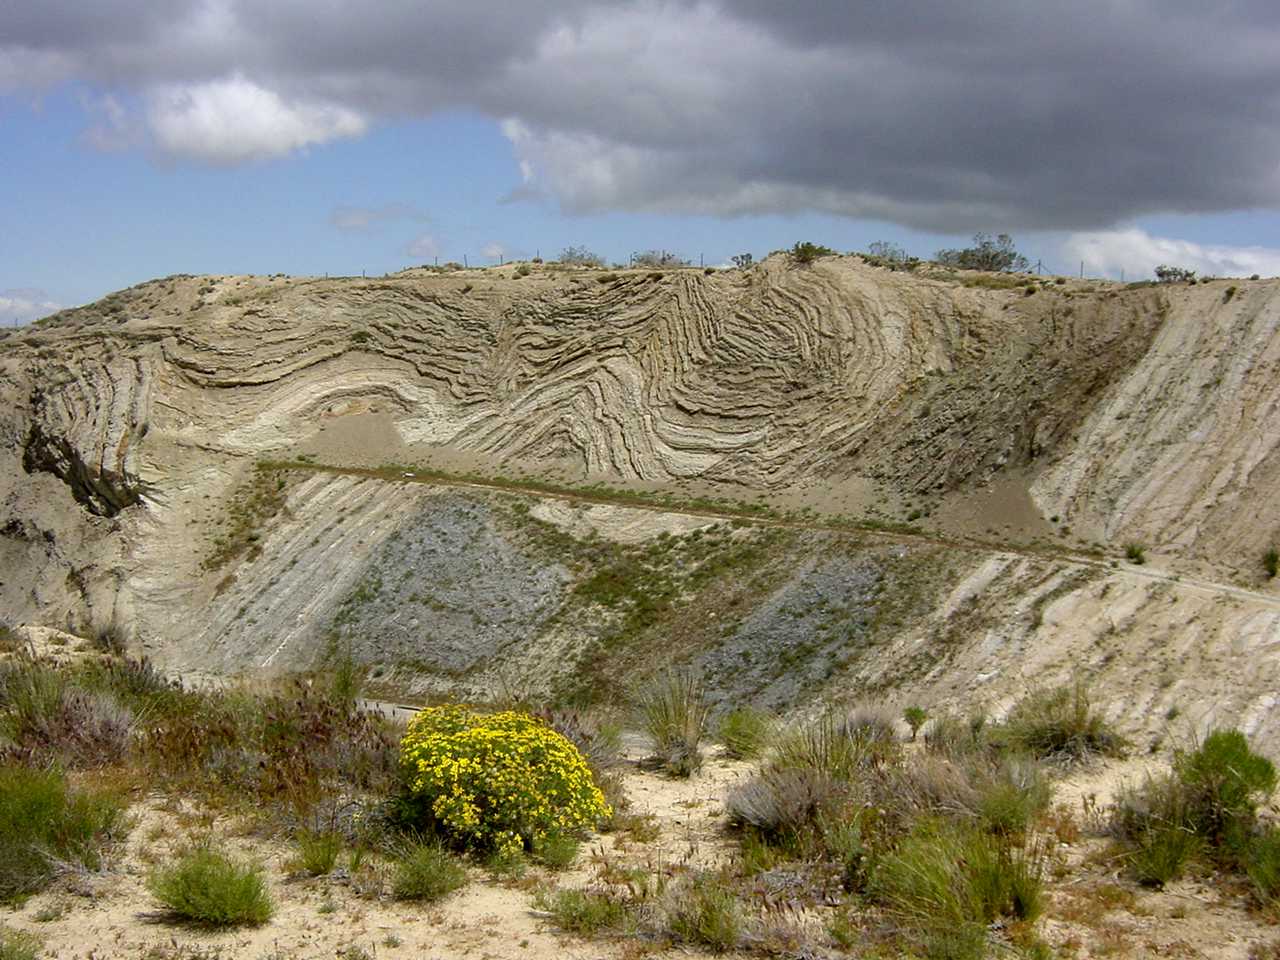 Folds exposed in a roadcut along Highway 14 in Palmdale, California, adjacent to San Andreas fault. With permission by: Garry Hayes and Susan Hayes from: http://geotripperimages.com/Tectonic_Processes/Folds.htm